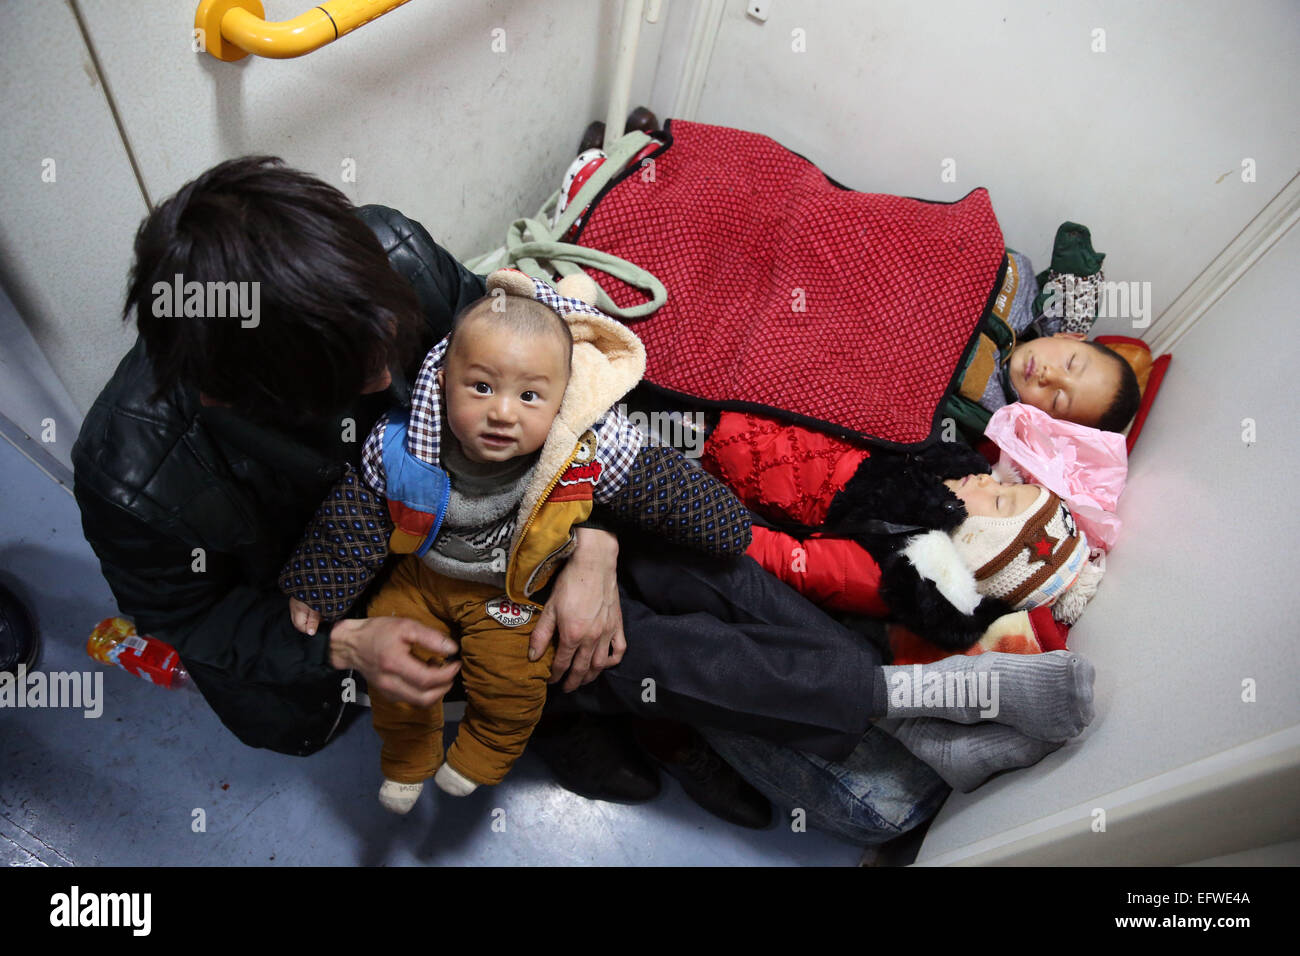 Shanghai, China's Sichuan Province. 9th Sep, 2015. Children have a sleep on the ground of train 3663, which runs from east China's Shanghai to Chengdu, capital of southwest China's Sichuan Province, on Sept. 9, 2015. The Spring Festival, or the Chinese lunar New Year which starts from Feb. 19 this year, is known as the world's biggest migration, with millions of people traveling vast distances for family reunions. © Ding Ting/Xinhua/Alamy Live News Stock Photo